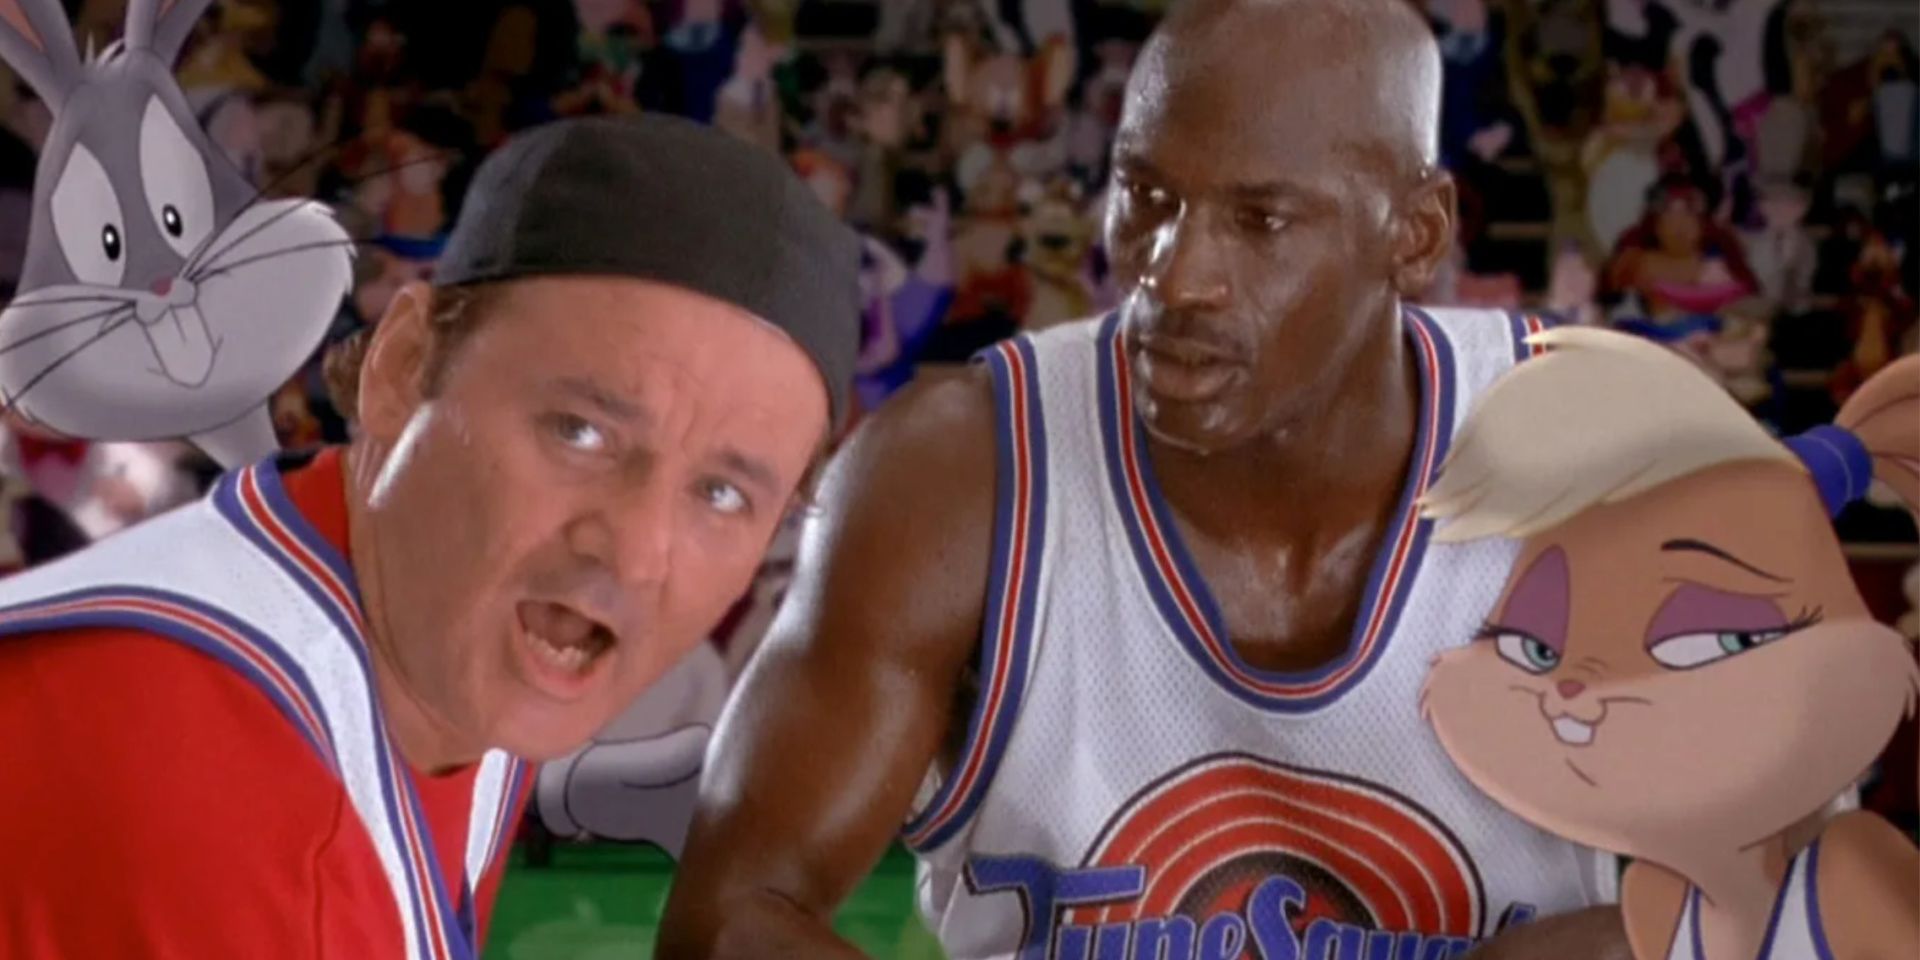 Bill Murray talks to Michael Jordan and the Looney Tunes in Space Jam